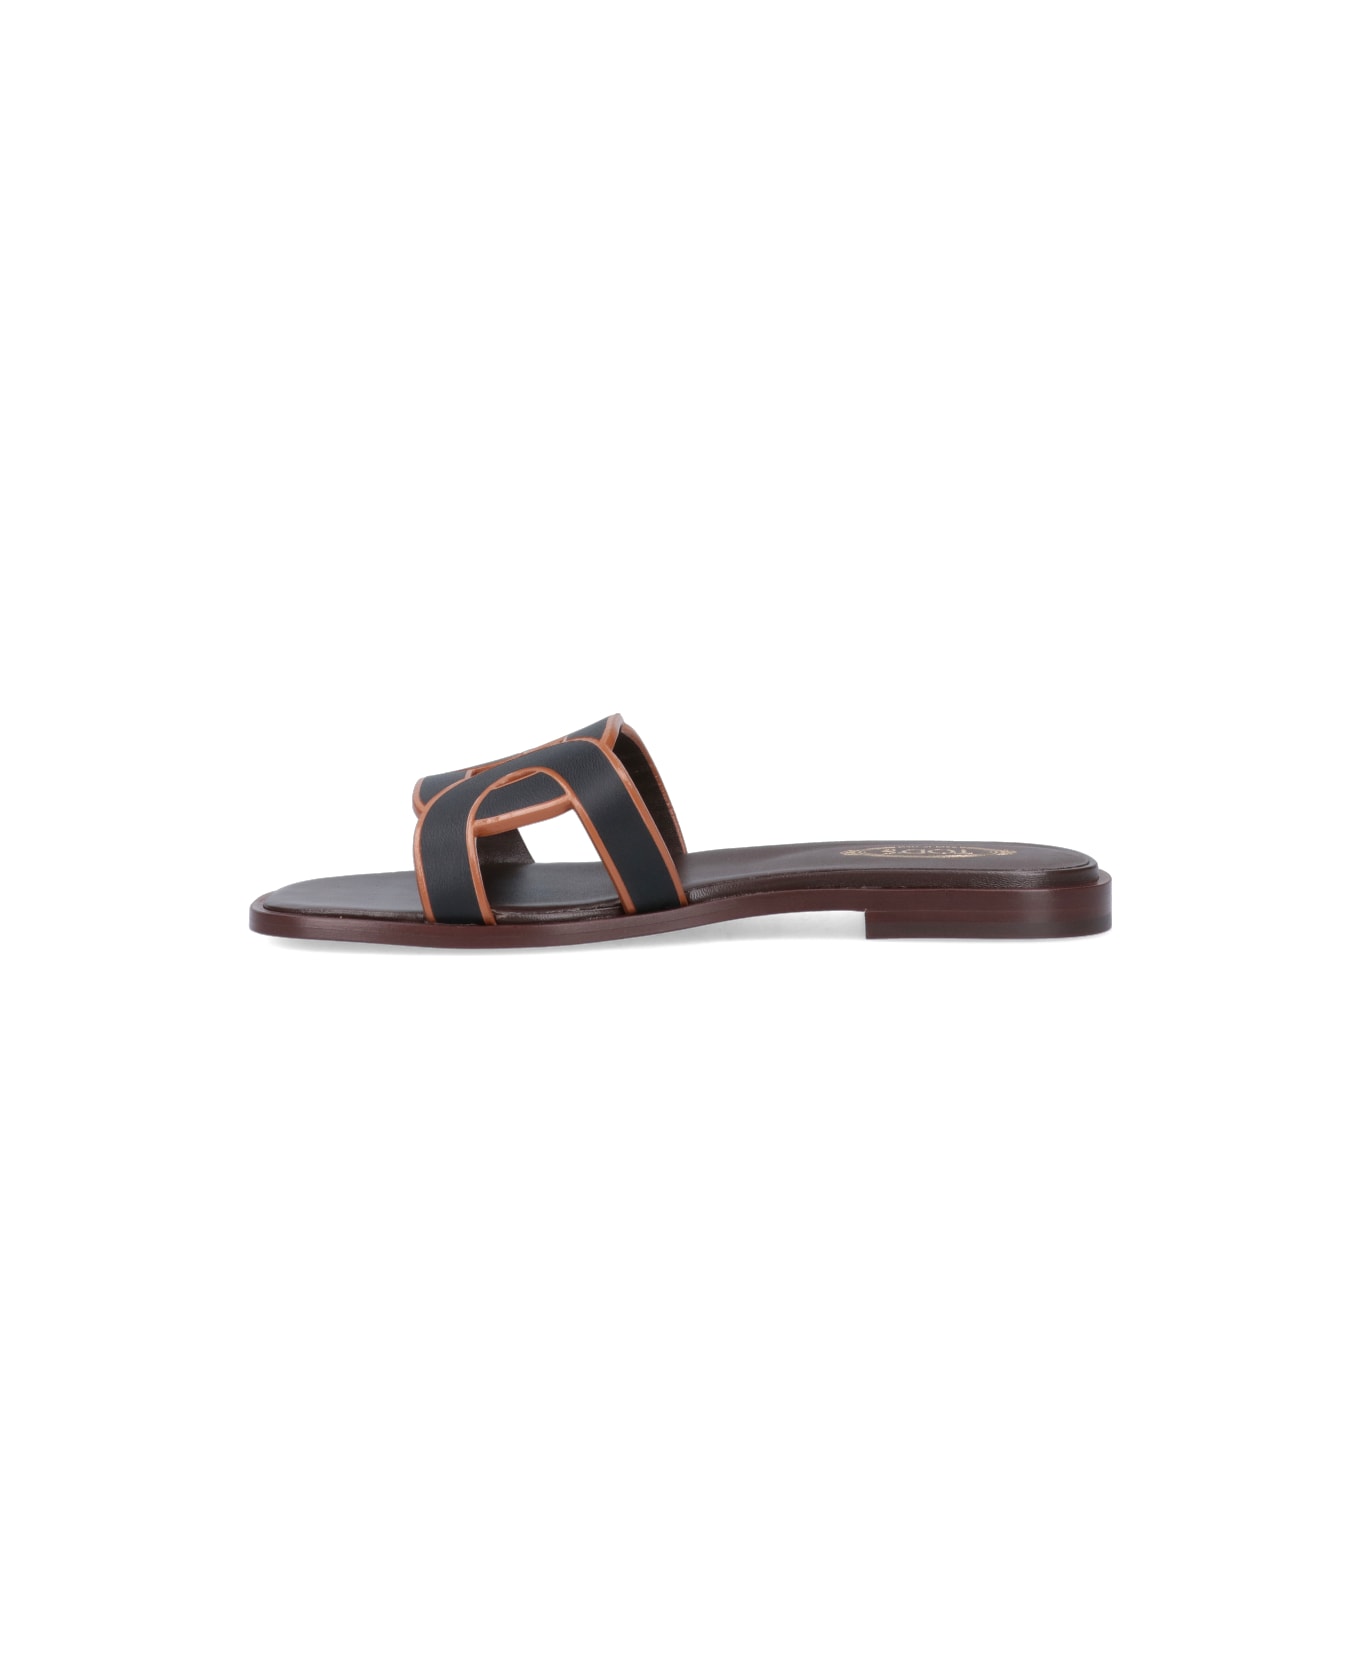 Tod's Shaped Sandals - Black  